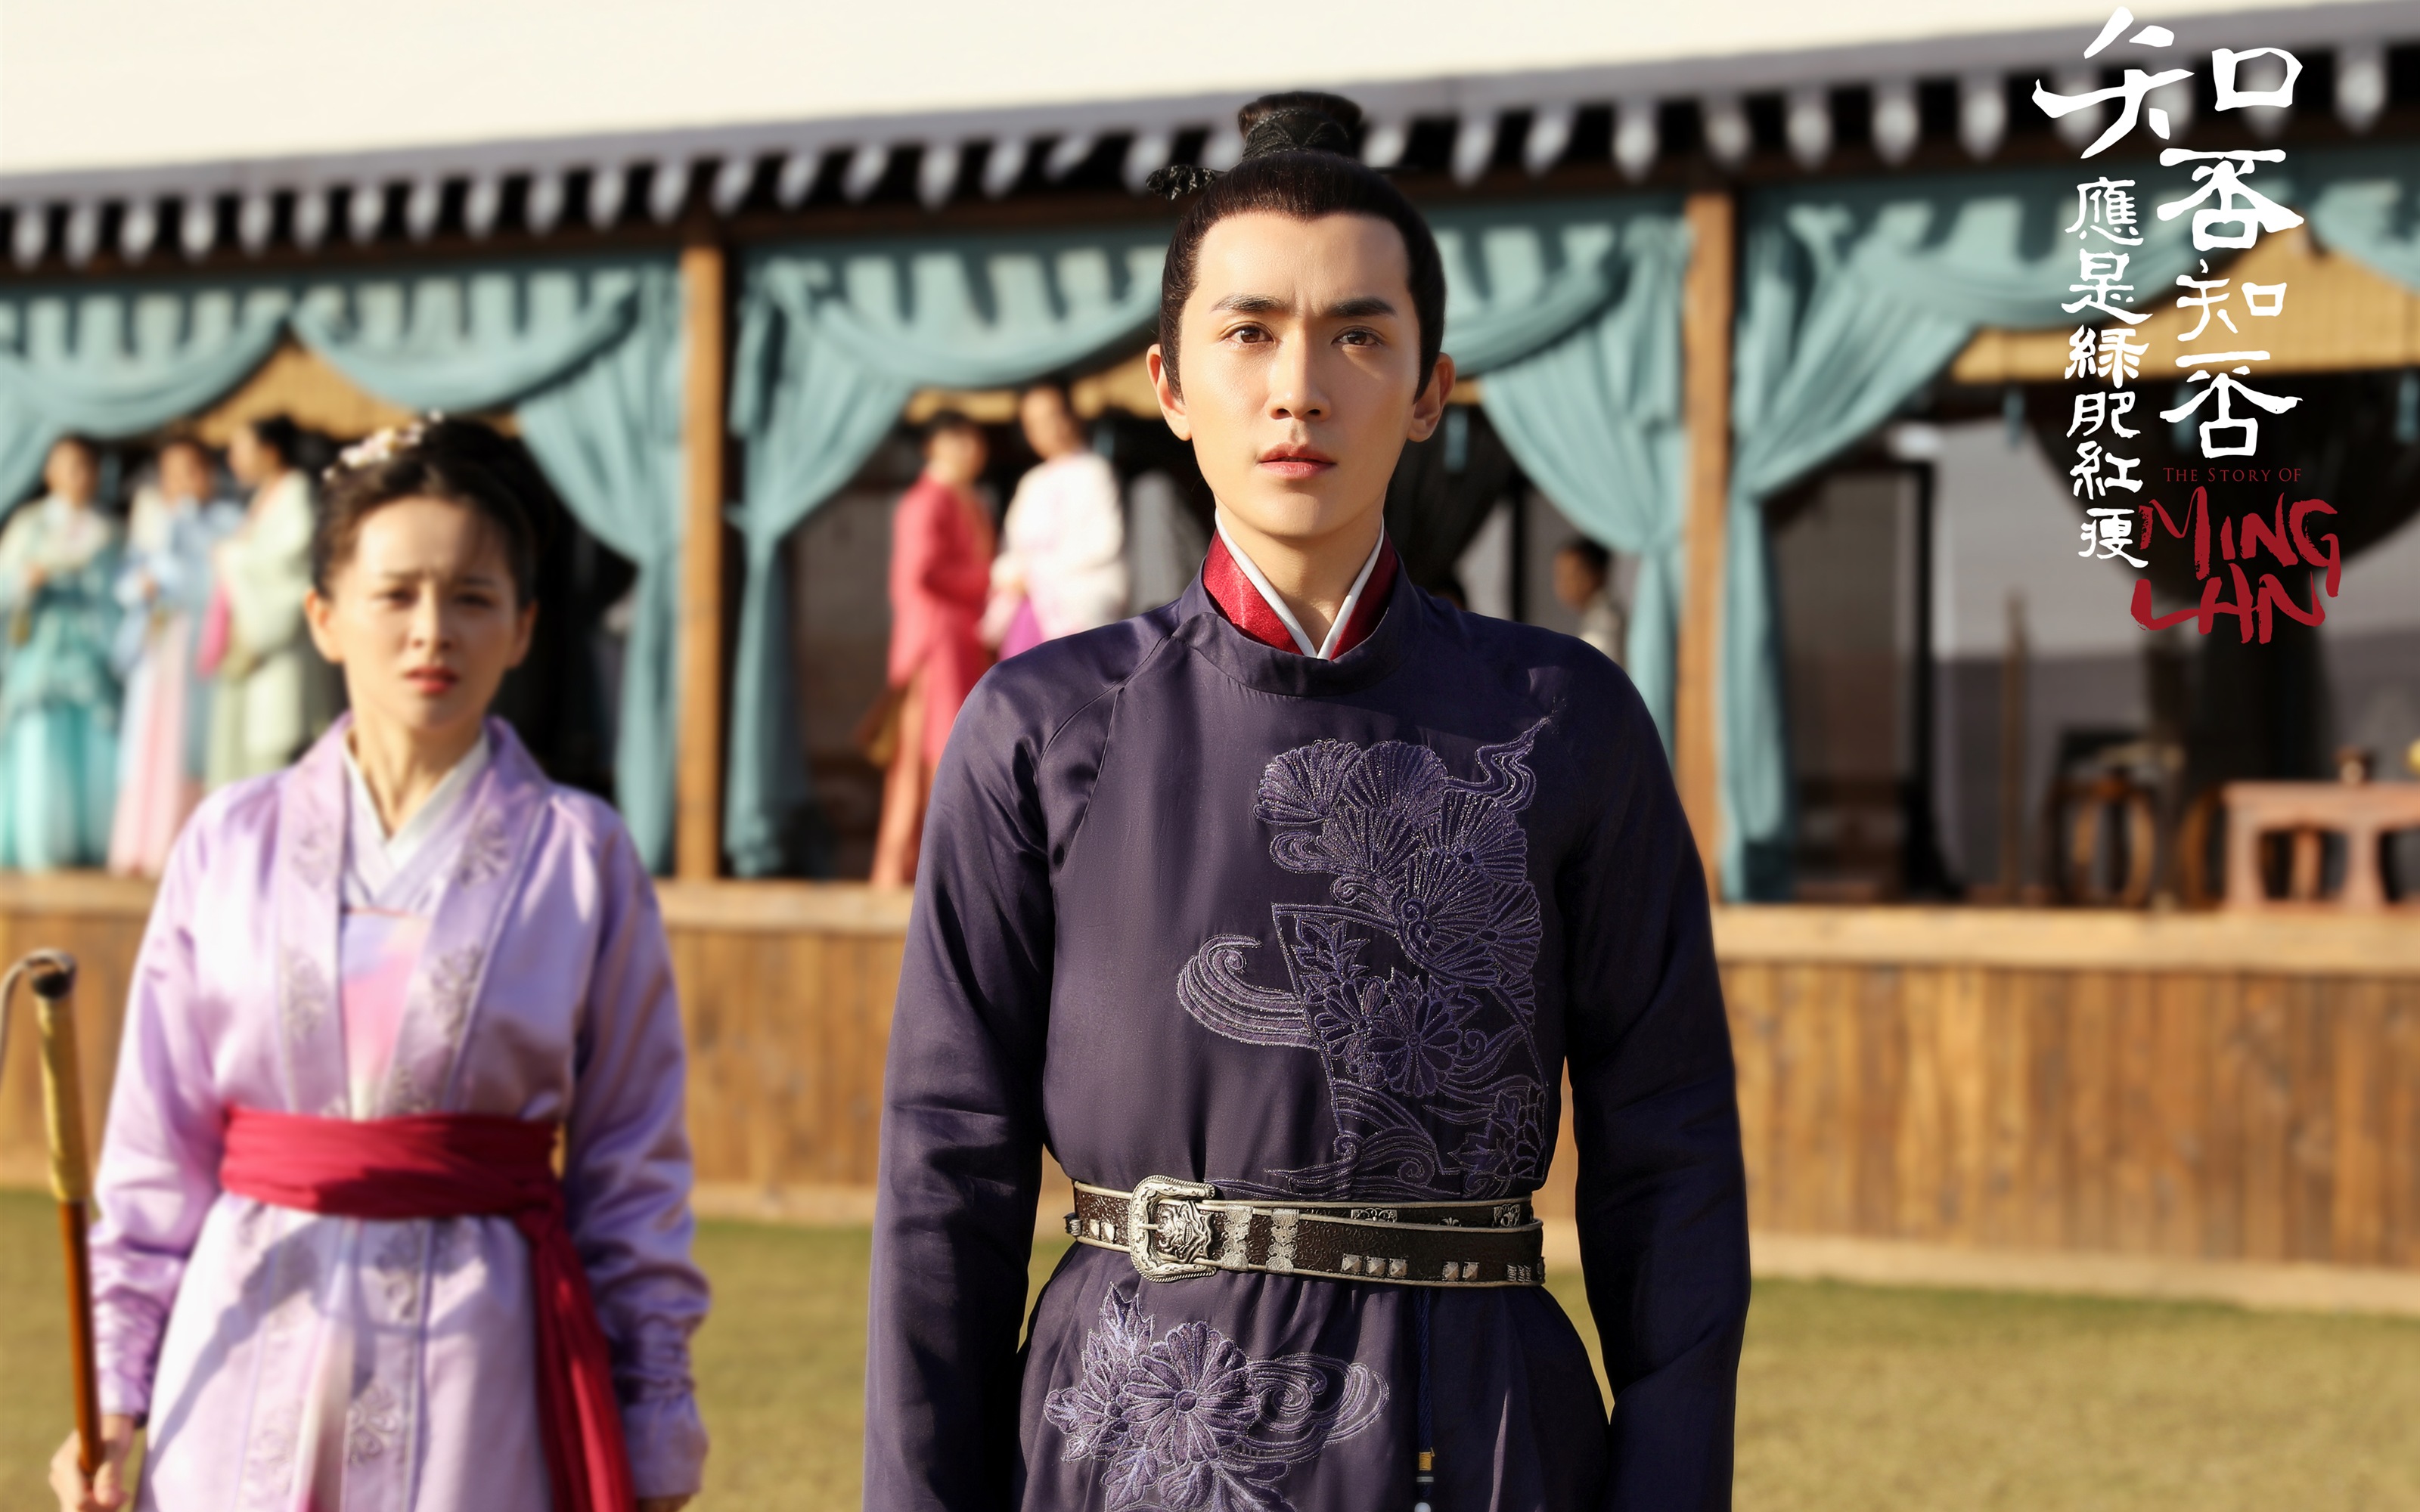 The Story Of MingLan, TV series HD wallpapers #38 - 3200x2000